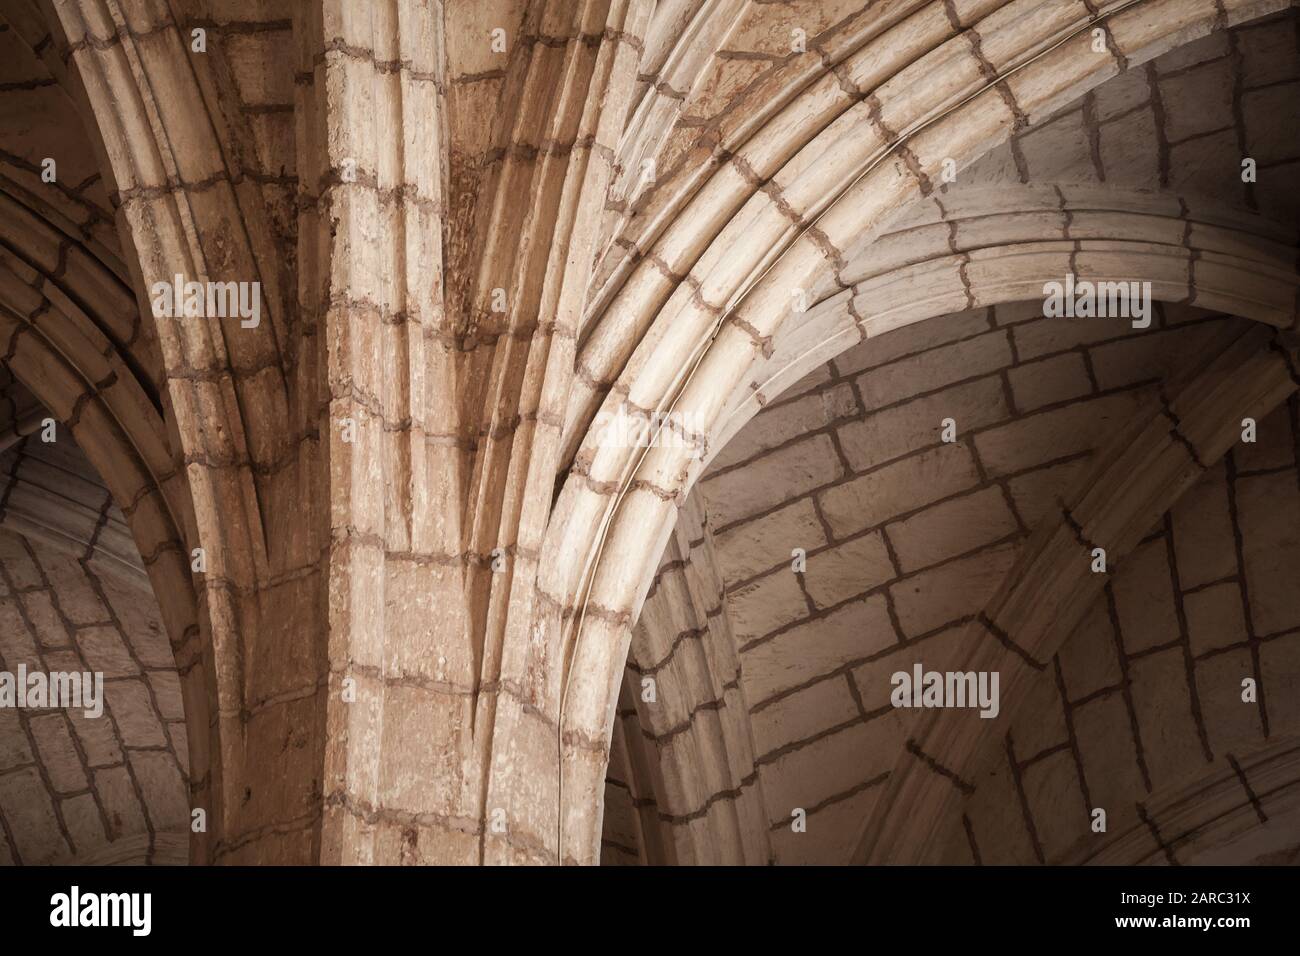 Classic Gothic column and arched vault, abstract architectural background photo Stock Photo